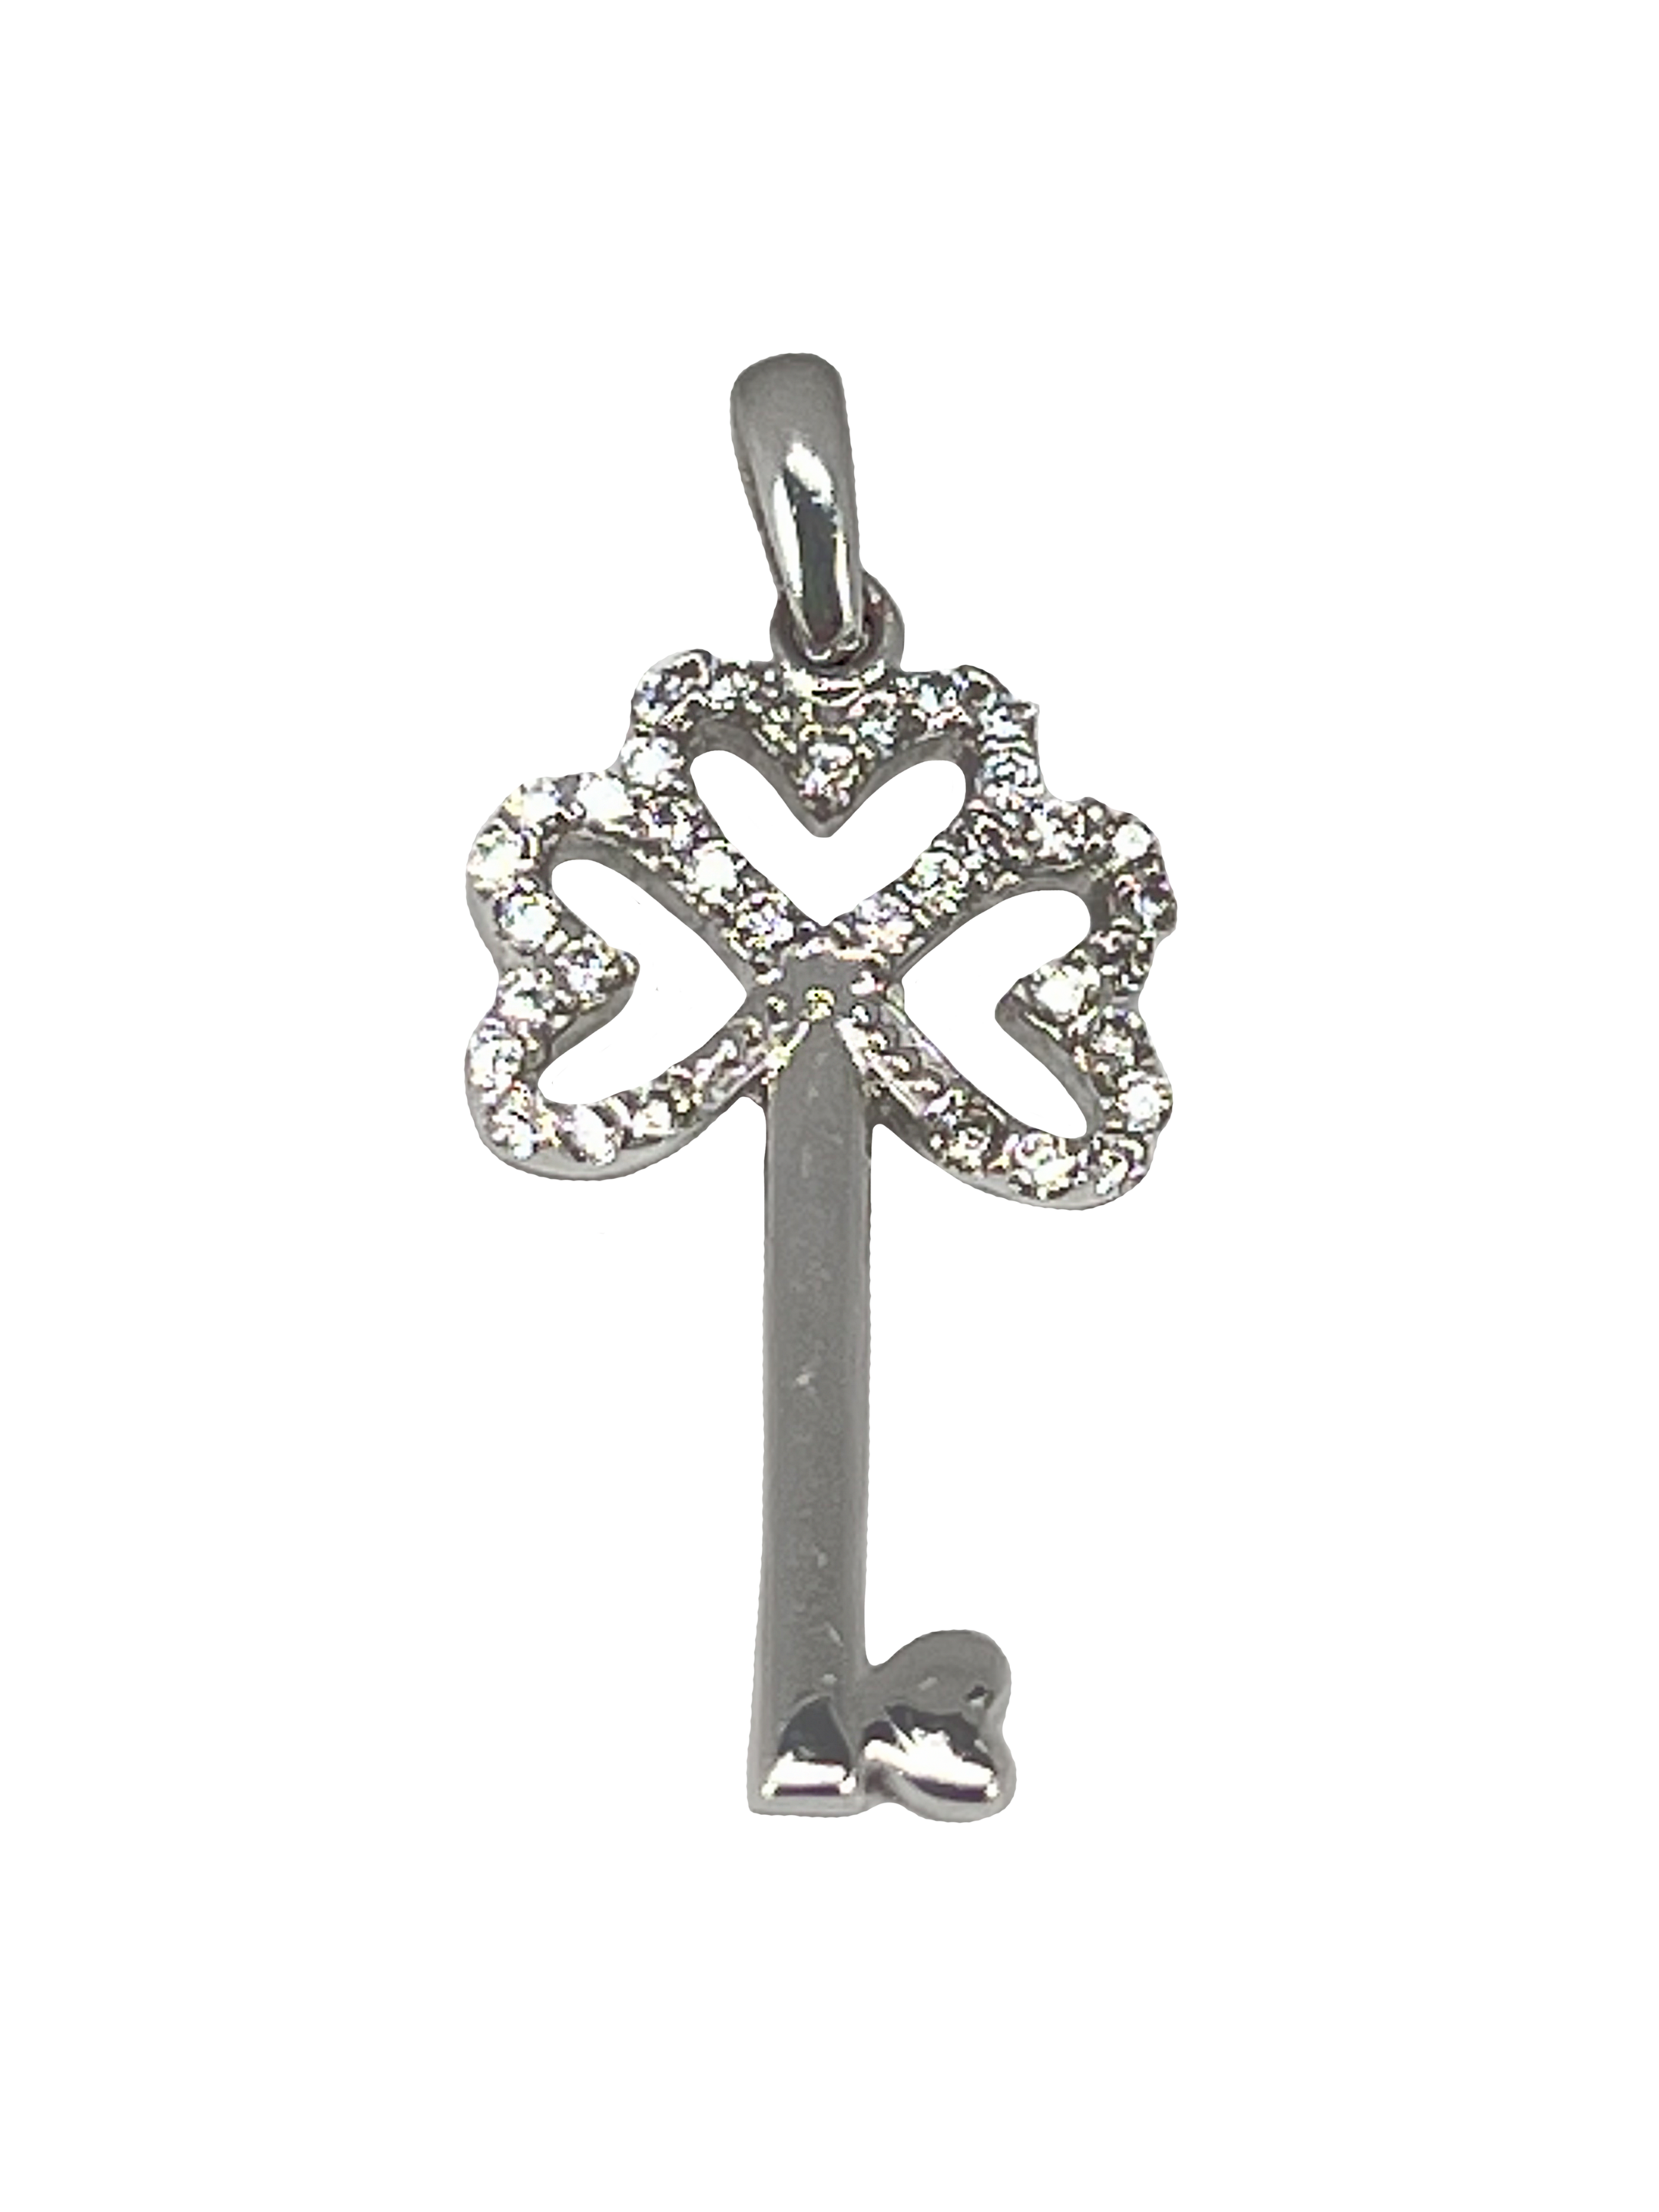 Golden pendant key to the heart made of white gold with zircons